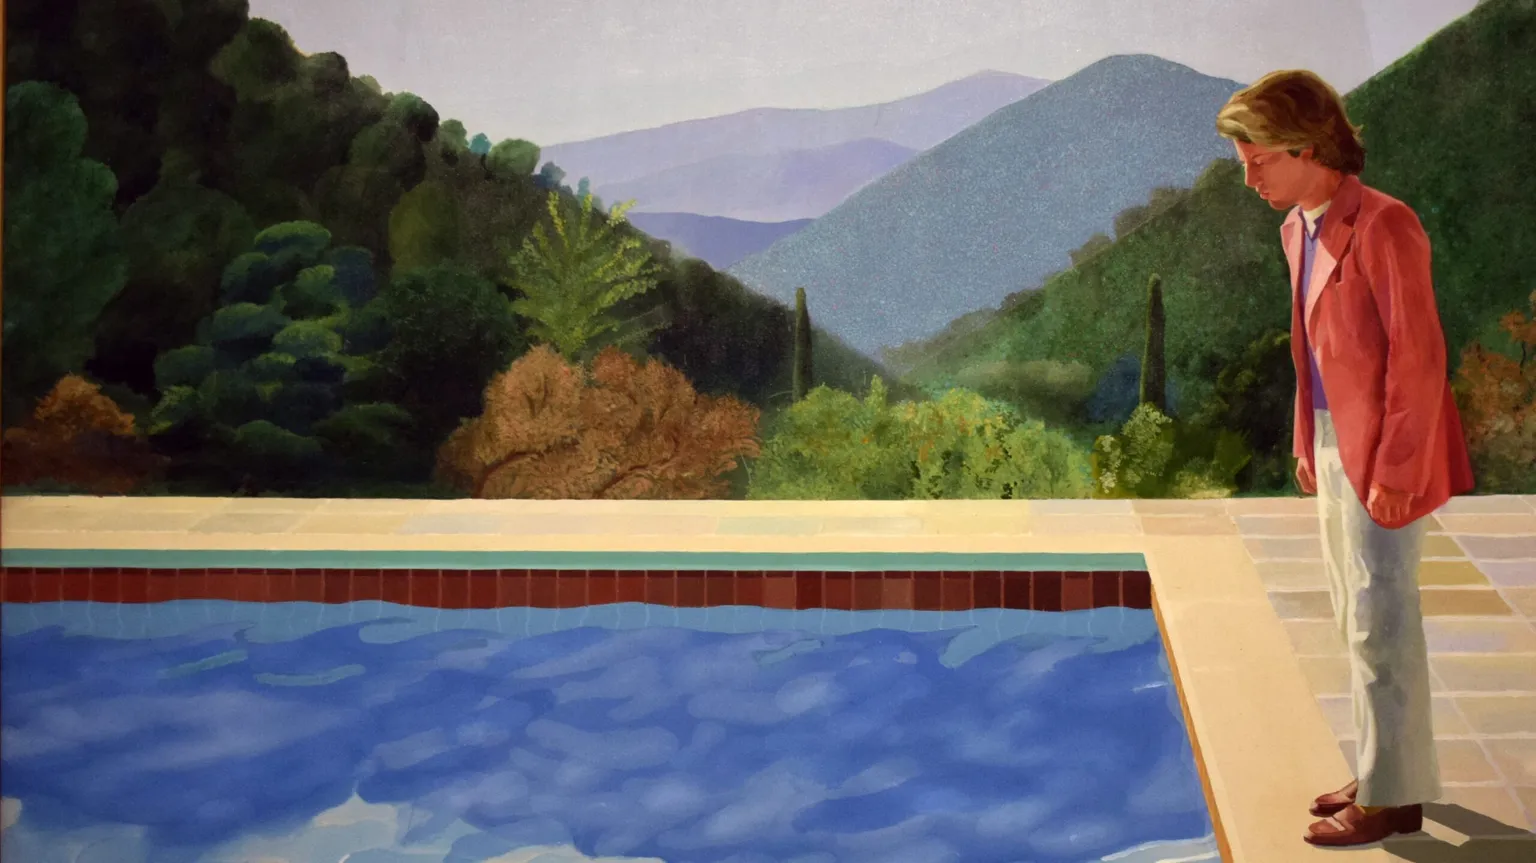 Image: David Hockney painting 'Portrait of an Artist (Pool with Two Figures)' via Flickr user Daniel Hartwig (CC BY 2.0)